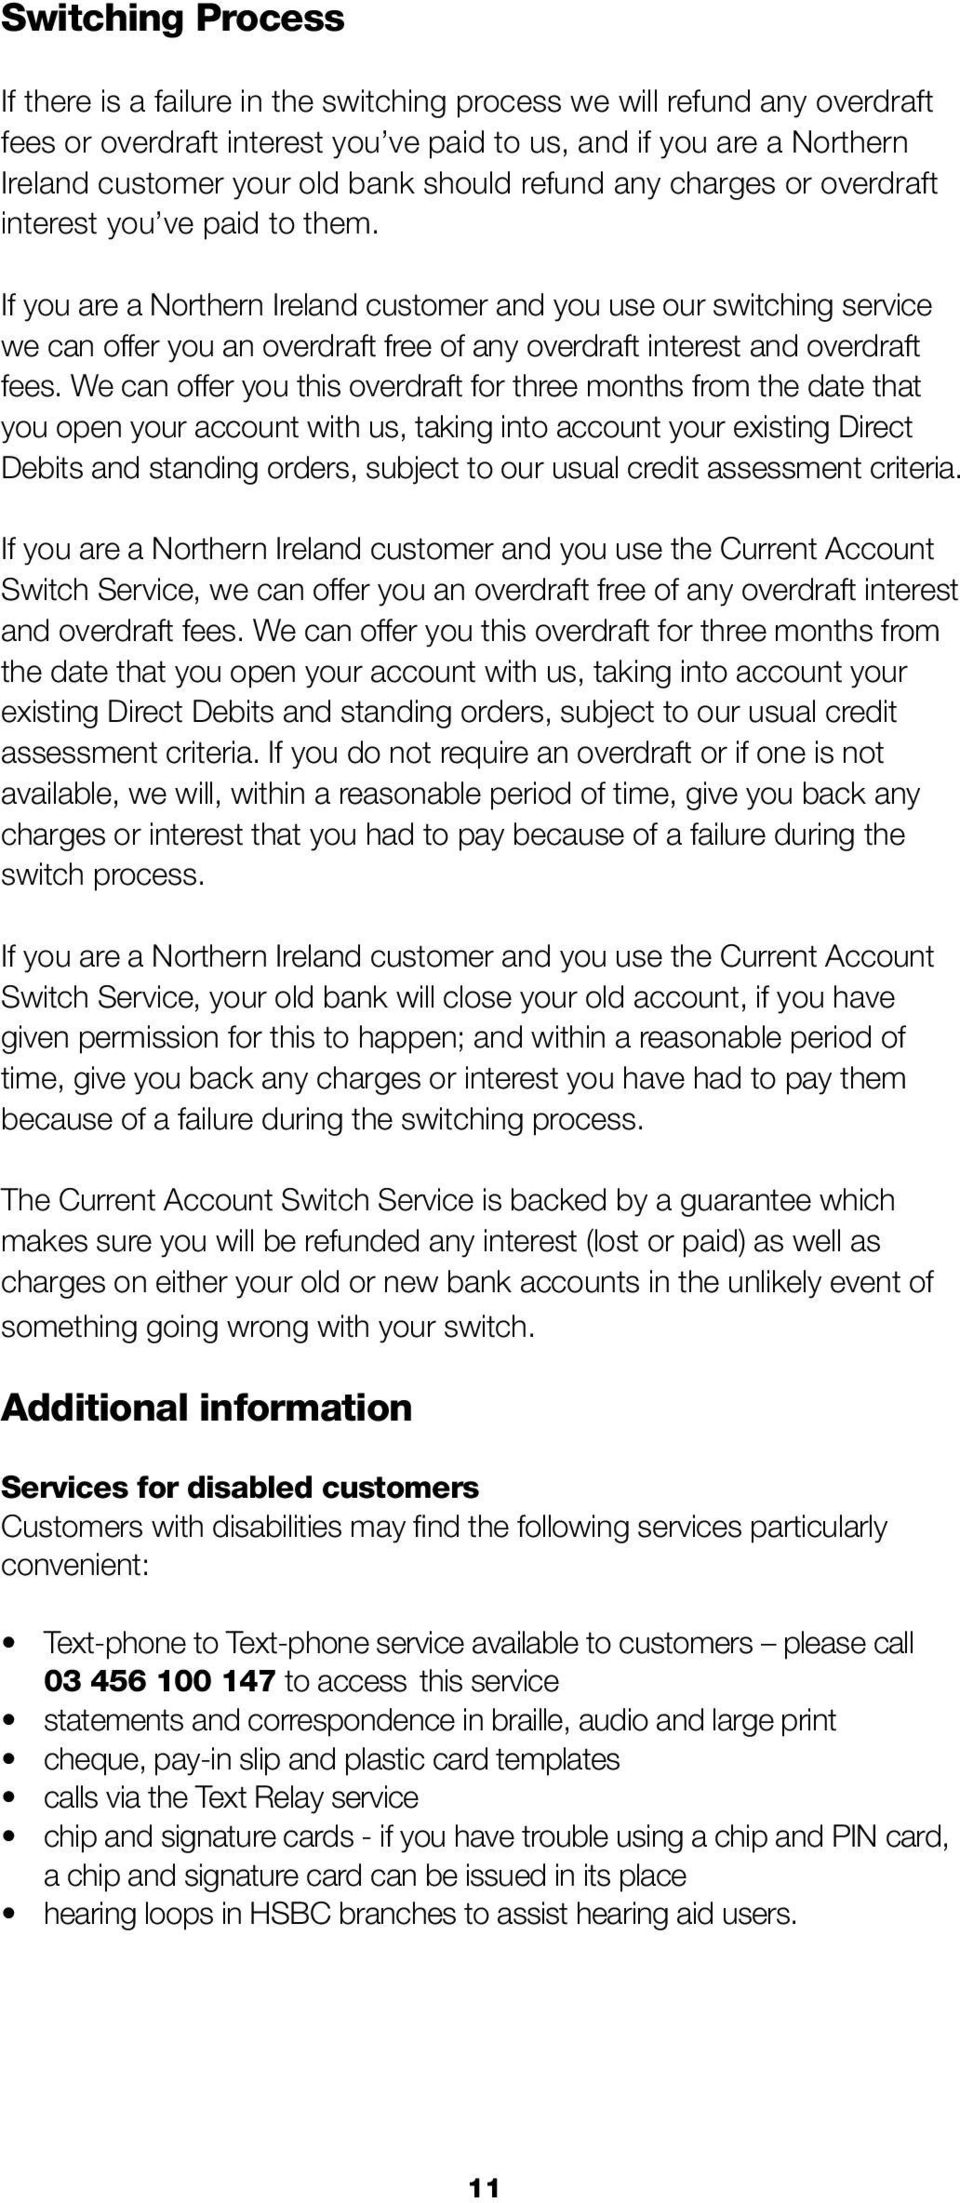 If you are a Northern Ireland customer and you use our switching service we can offer you an overdraft free of any overdraft interest and overdraft fees.